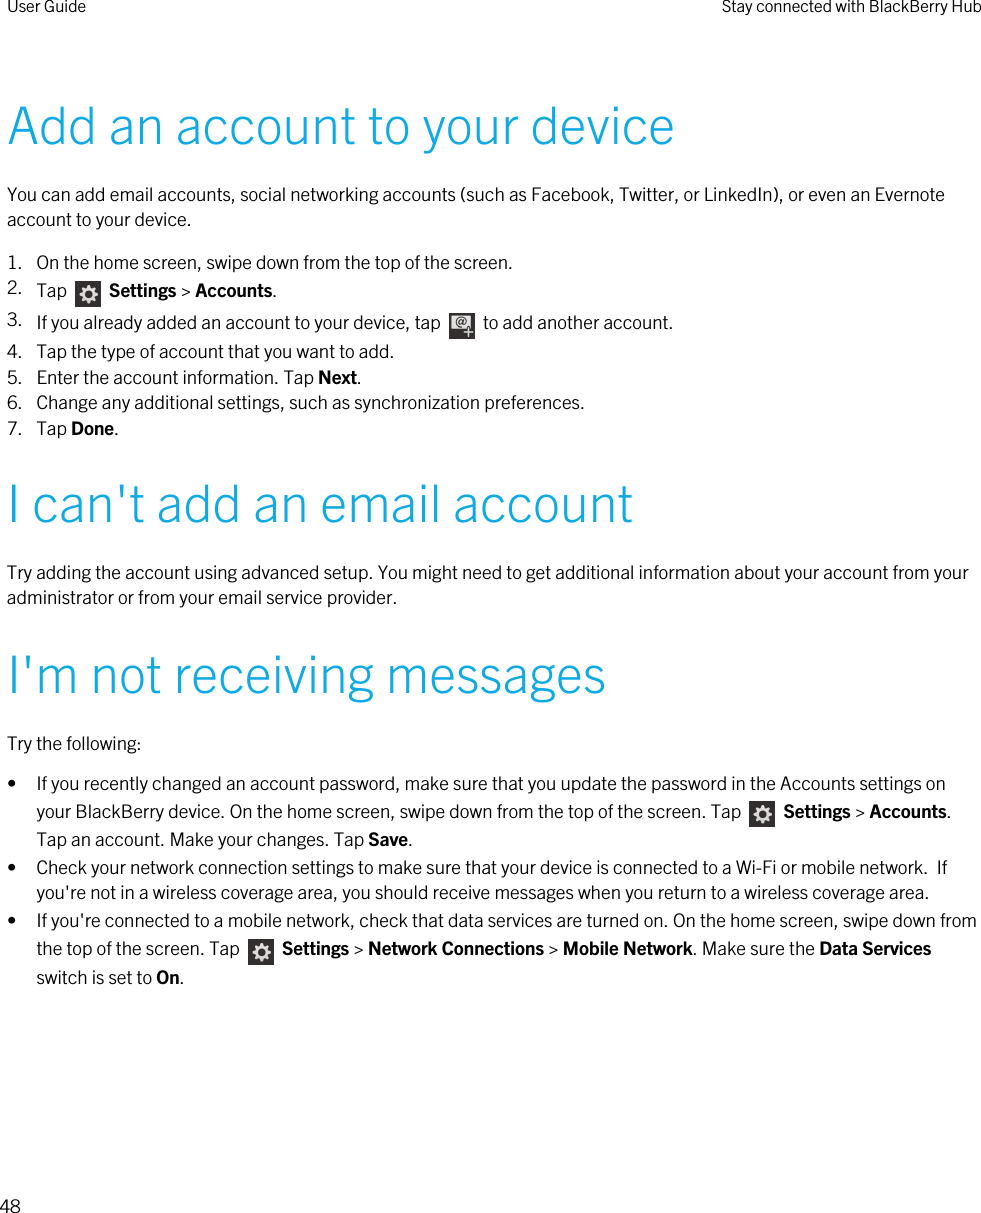 Add an account to your deviceYou can add email accounts, social networking accounts (such as Facebook, Twitter, or LinkedIn), or even an Evernote account to your device.1. On the home screen, swipe down from the top of the screen.2. Tap    Settings &gt; Accounts.3. If you already added an account to your device, tap    to add another account.4. Tap the type of account that you want to add.5. Enter the account information. Tap Next.6. Change any additional settings, such as synchronization preferences.7. Tap Done.I can&apos;t add an email accountTry adding the account using advanced setup. You might need to get additional information about your account from your administrator or from your email service provider.I&apos;m not receiving messagesTry the following:• If you recently changed an account password, make sure that you update the password in the Accounts settings on your BlackBerry device. On the home screen, swipe down from the top of the screen. Tap    Settings &gt; Accounts. Tap an account. Make your changes. Tap Save.• Check your network connection settings to make sure that your device is connected to a Wi-Fi or mobile network.  If you&apos;re not in a wireless coverage area, you should receive messages when you return to a wireless coverage area.• If you&apos;re connected to a mobile network, check that data services are turned on. On the home screen, swipe down from the top of the screen. Tap    Settings &gt; Network Connections &gt; Mobile Network. Make sure the Data Services switch is set to On.User Guide Stay connected with BlackBerry Hub48 